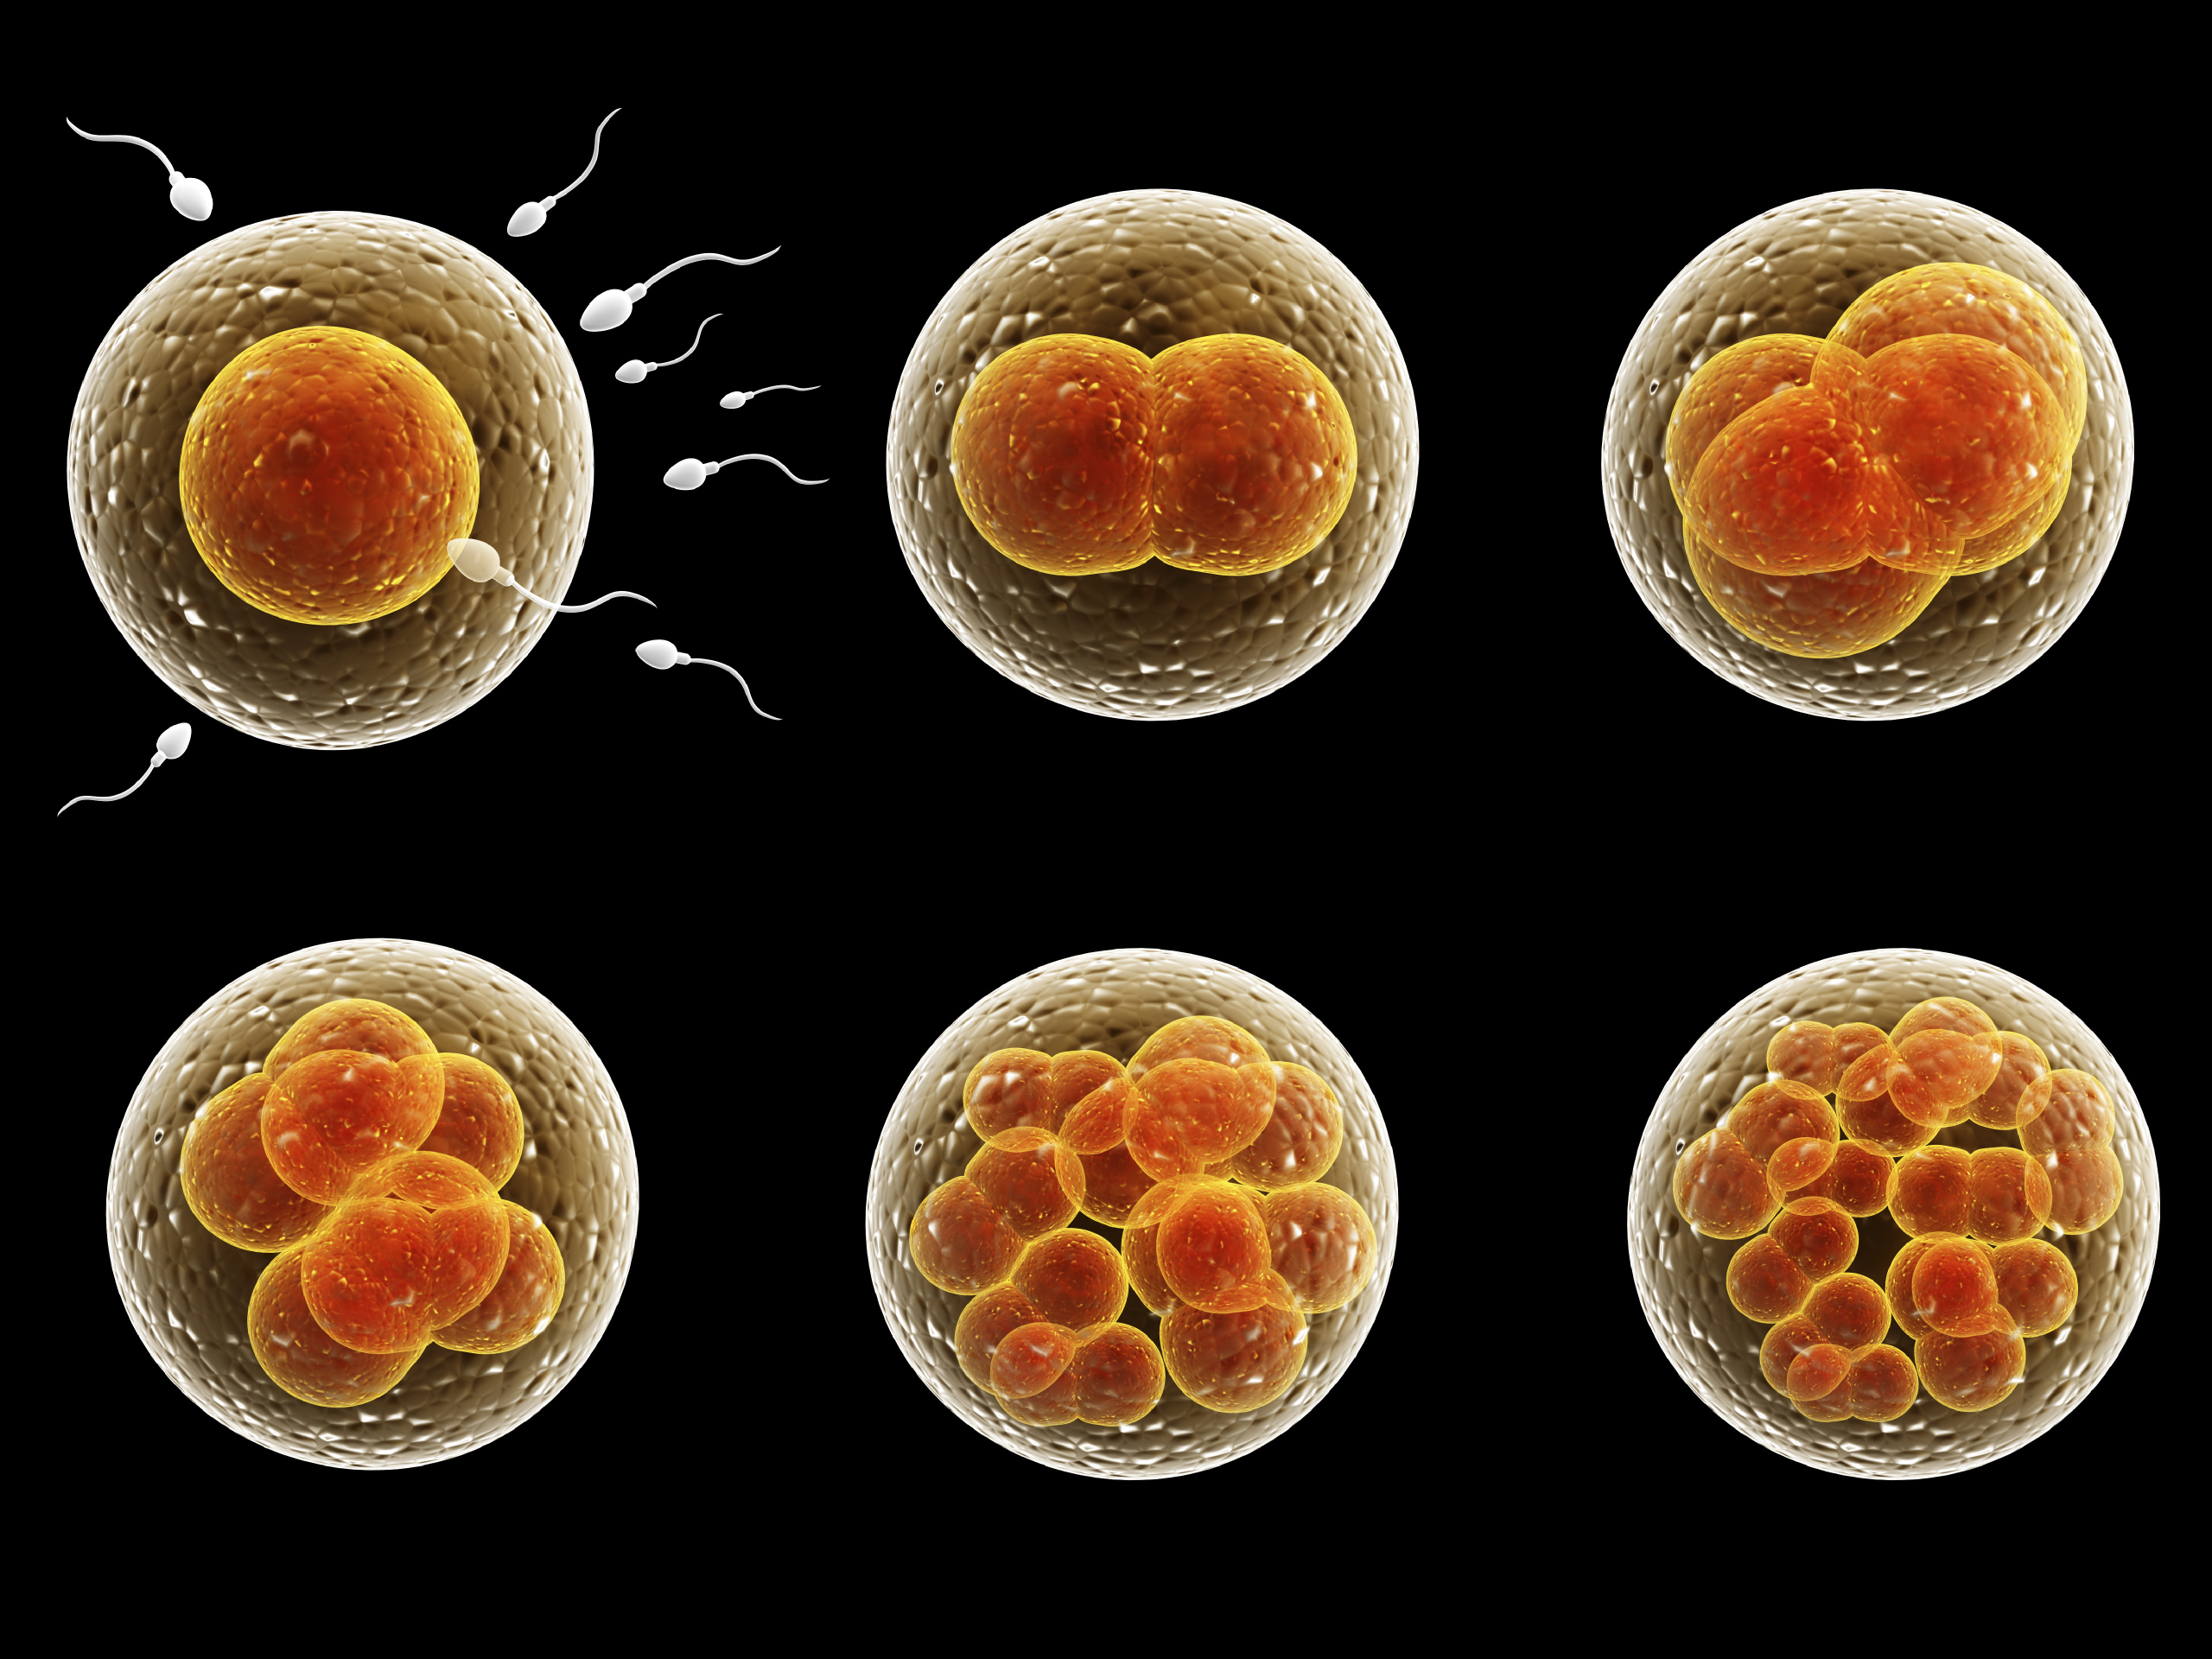 Process division of fertilized cell. Isolated on black background